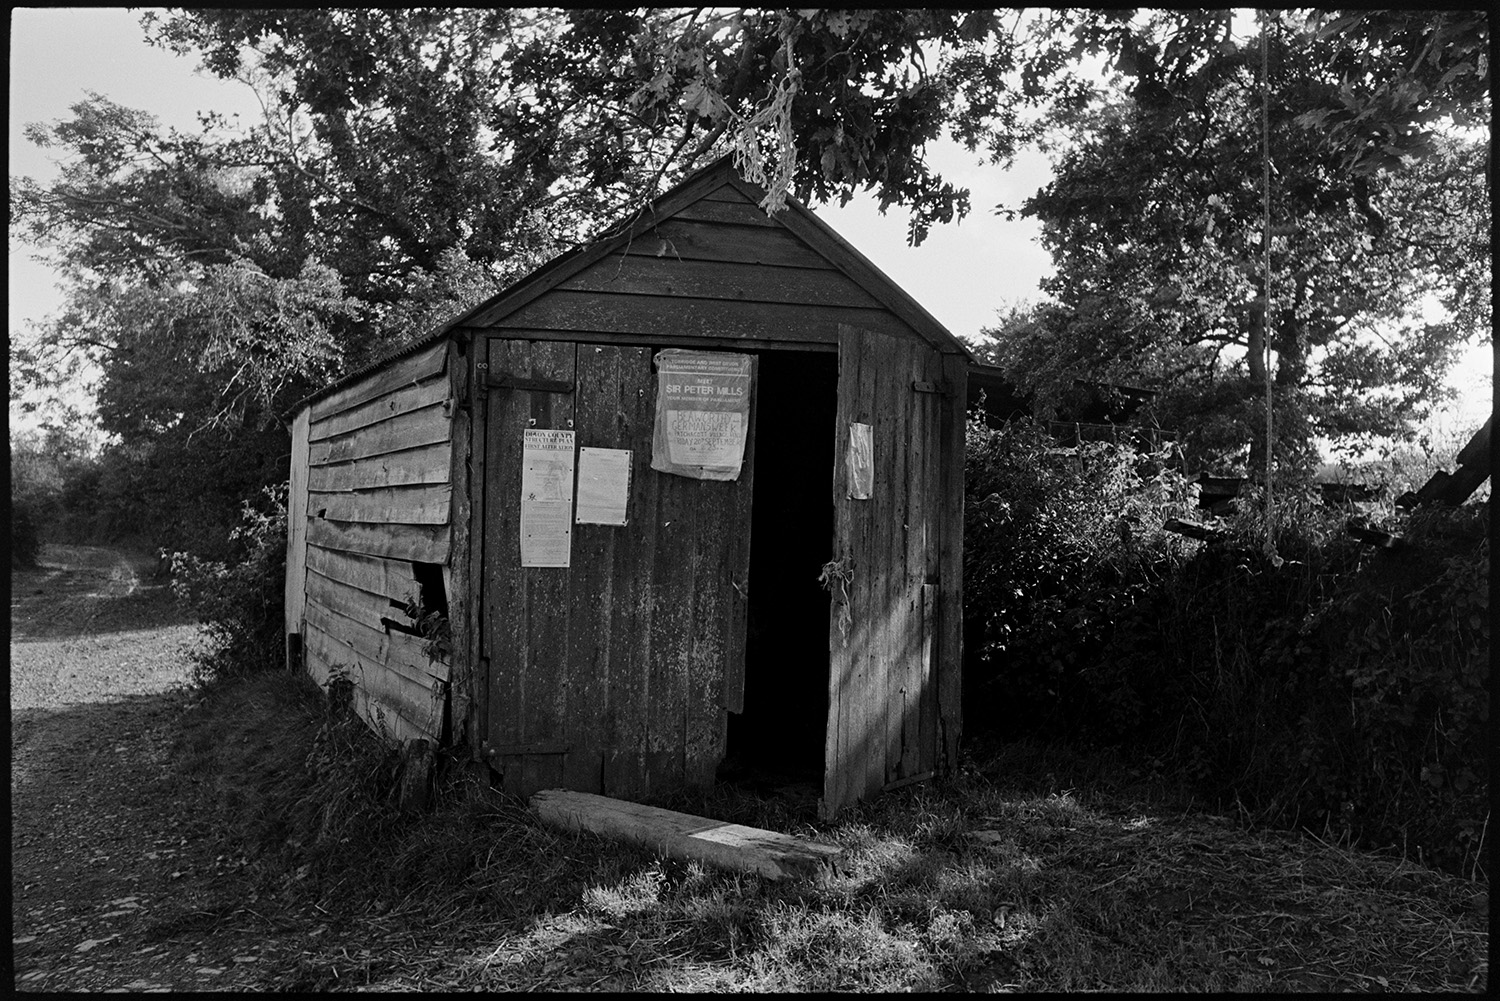 Small wooden shed, garage and house covered in posters. 
[A wooden shed or garage covered with posters, including one advertising a meeting with Sir Peter Mills MP, possibly near Northlew, Beaworthy.]